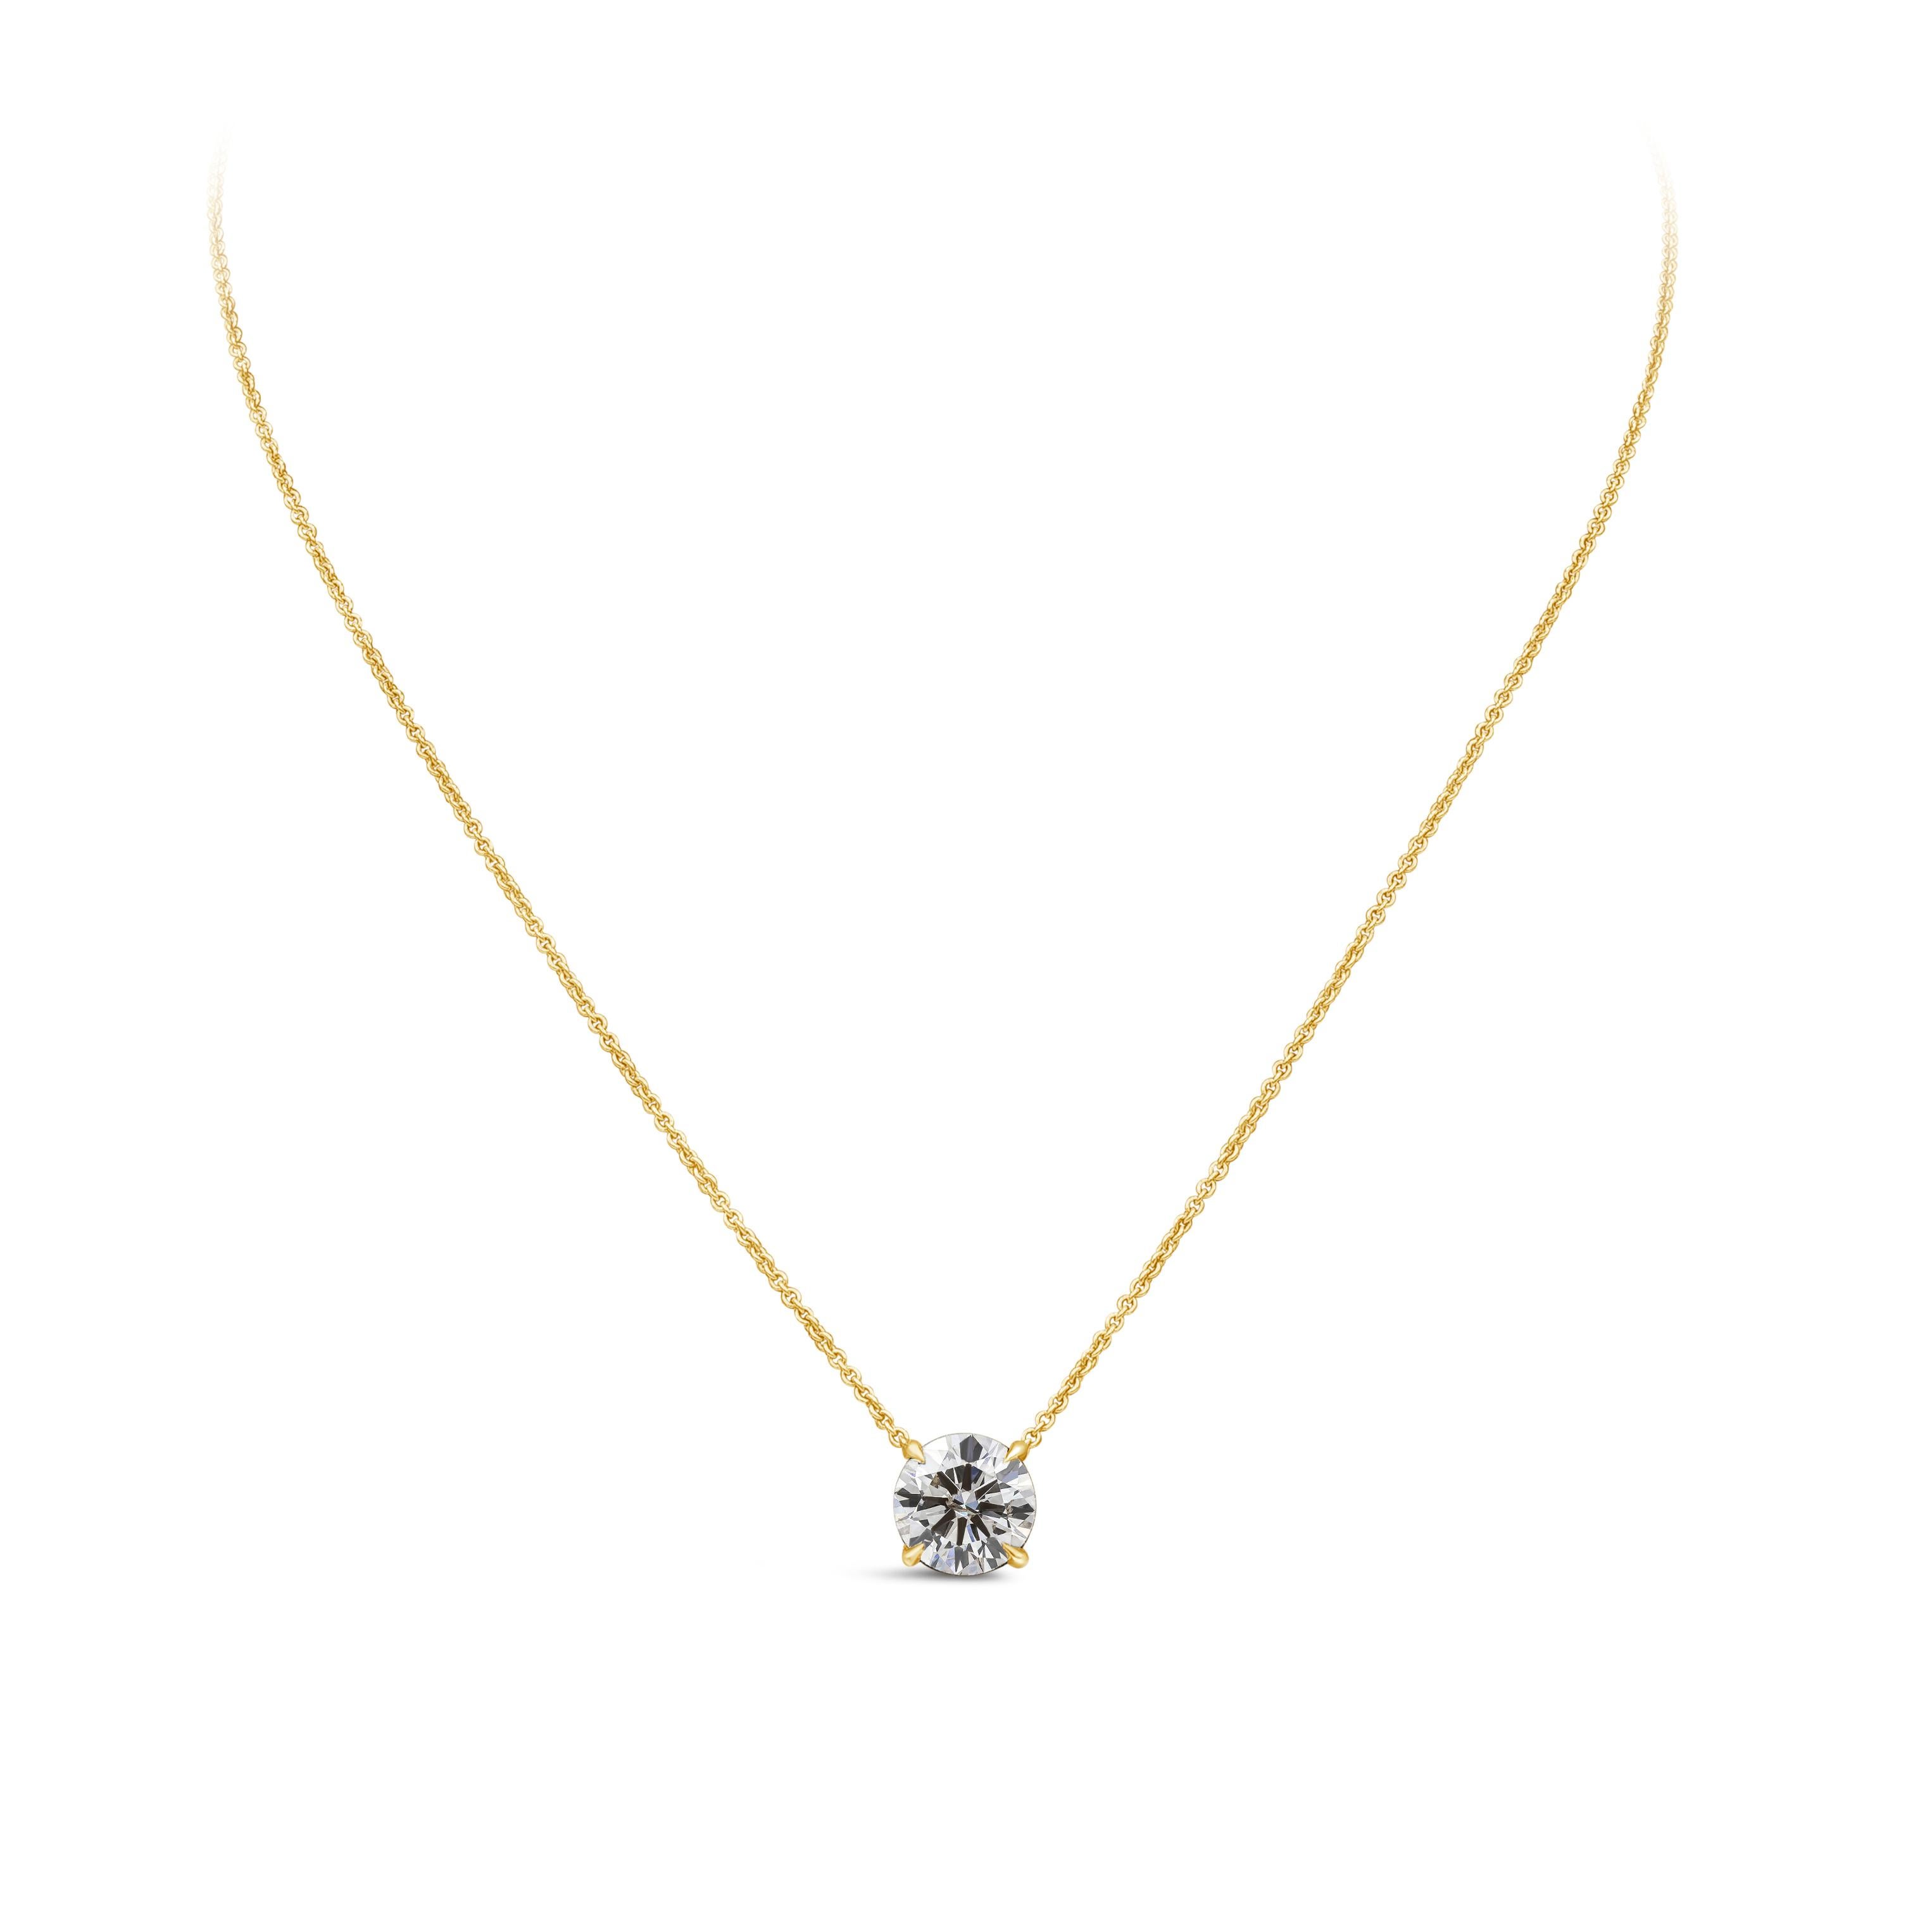 A classic solitaire pendant necklace, showcasing a single round brilliant cut diamond weighing 2.01 carats with K color and I1 clarity. Set on a traditional four-prong setting and made with 14K yellow gold. Suspended on an 18 inches yellow gold